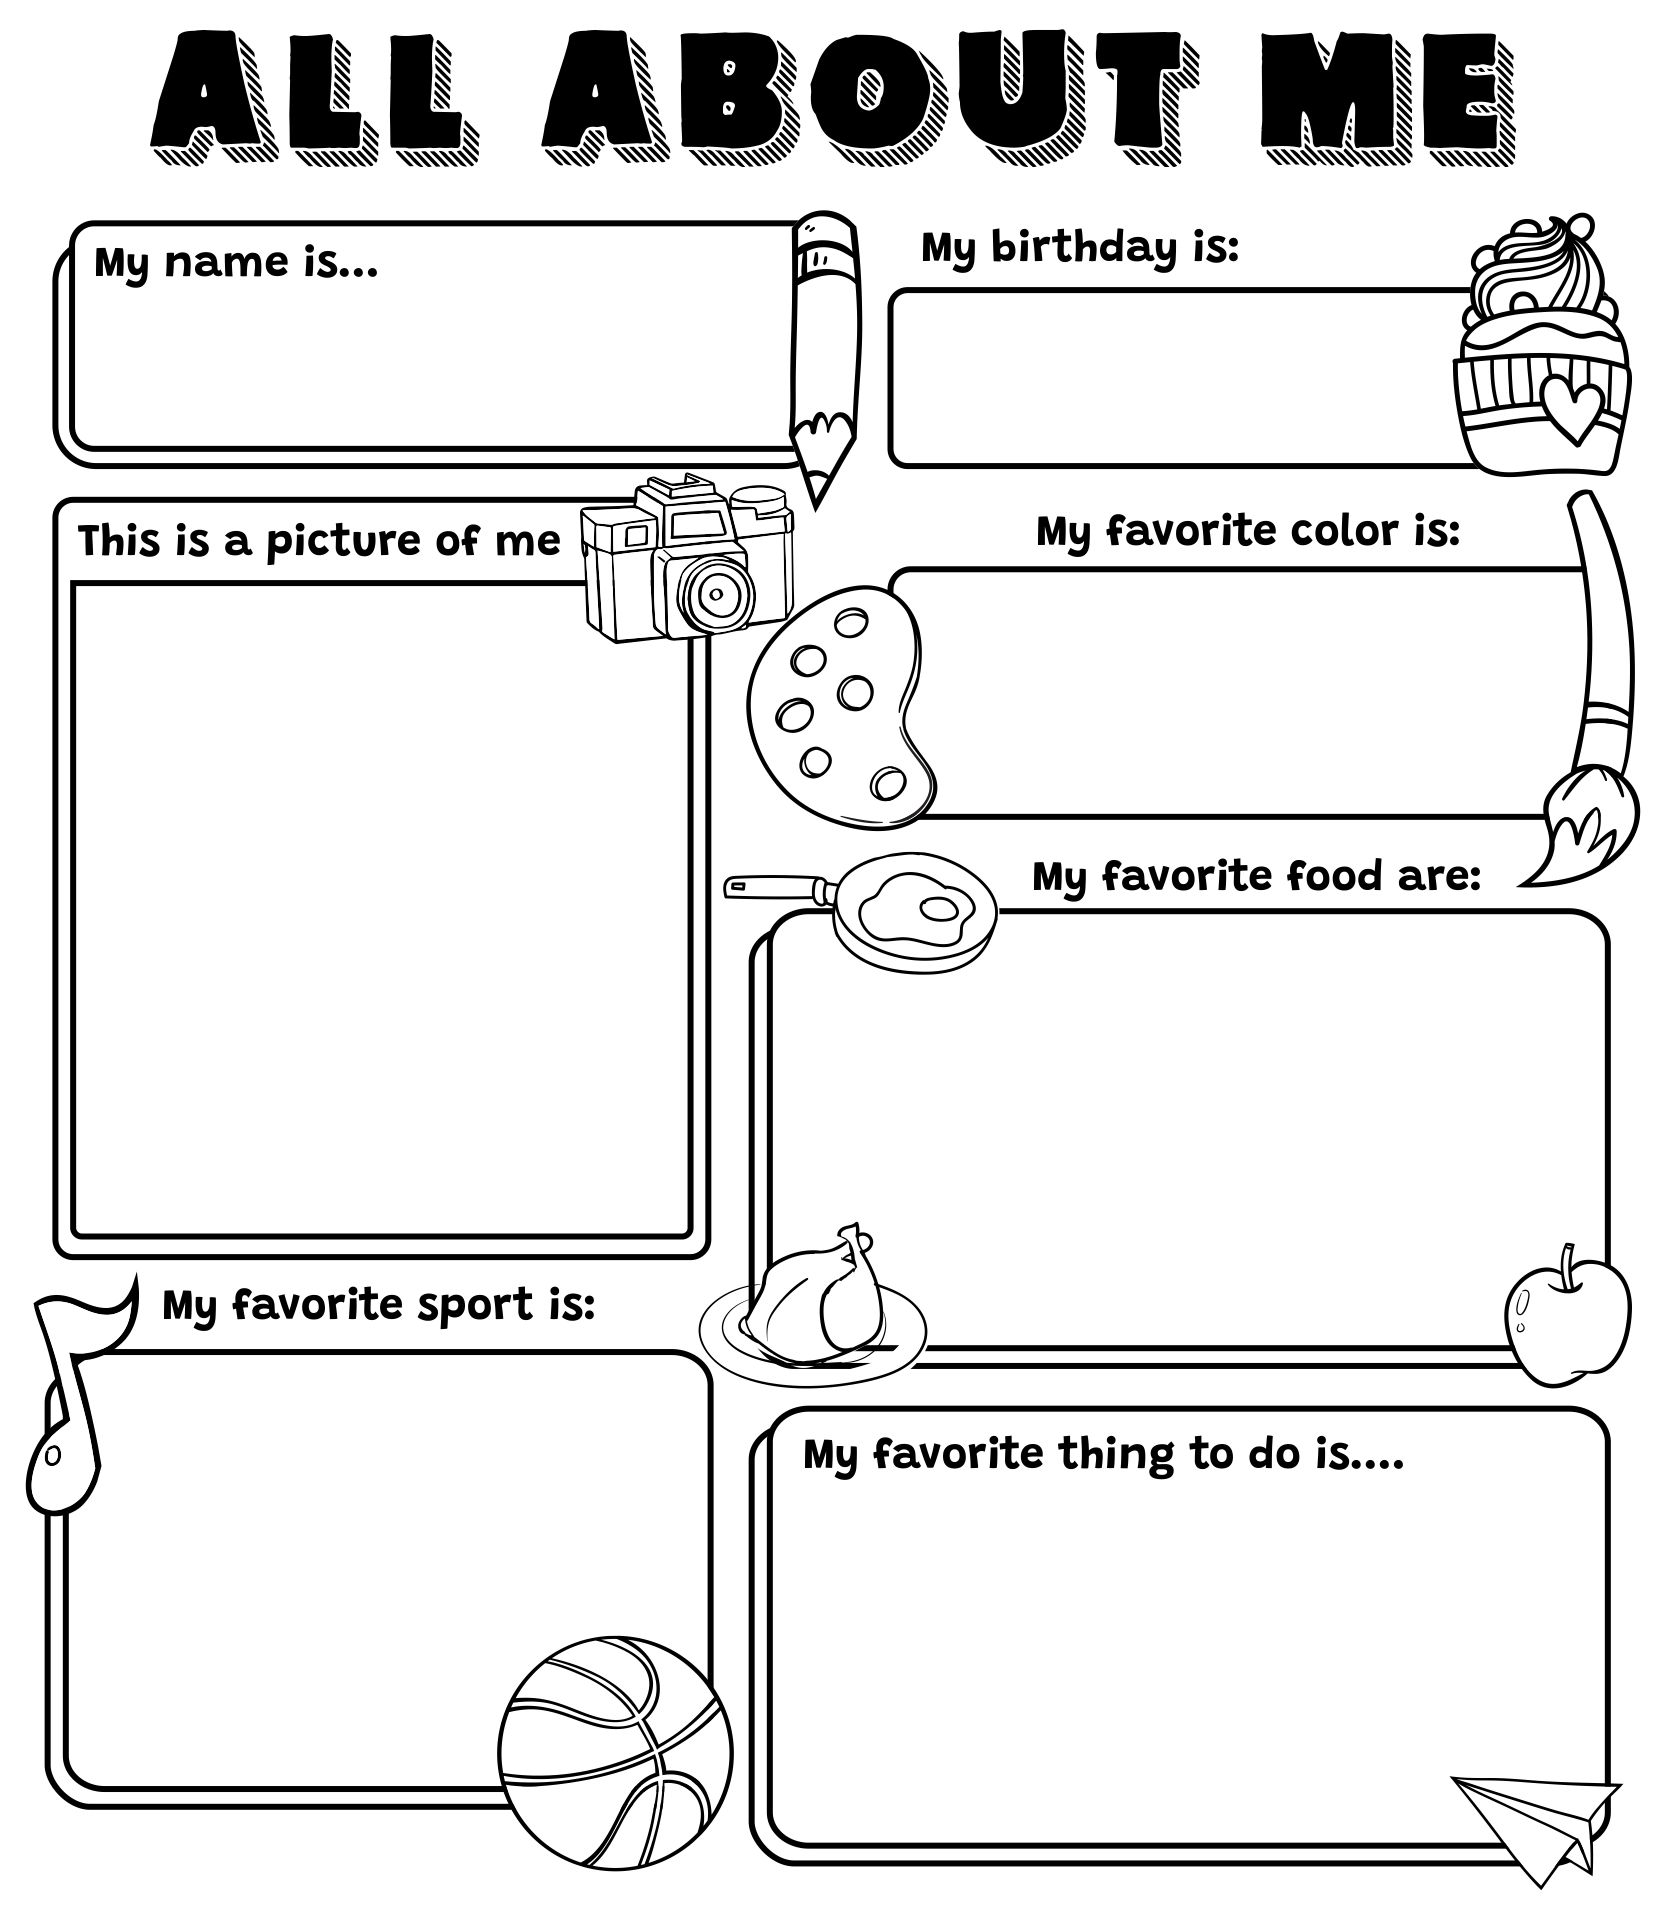 Printable All About Me Worksheets and Templates